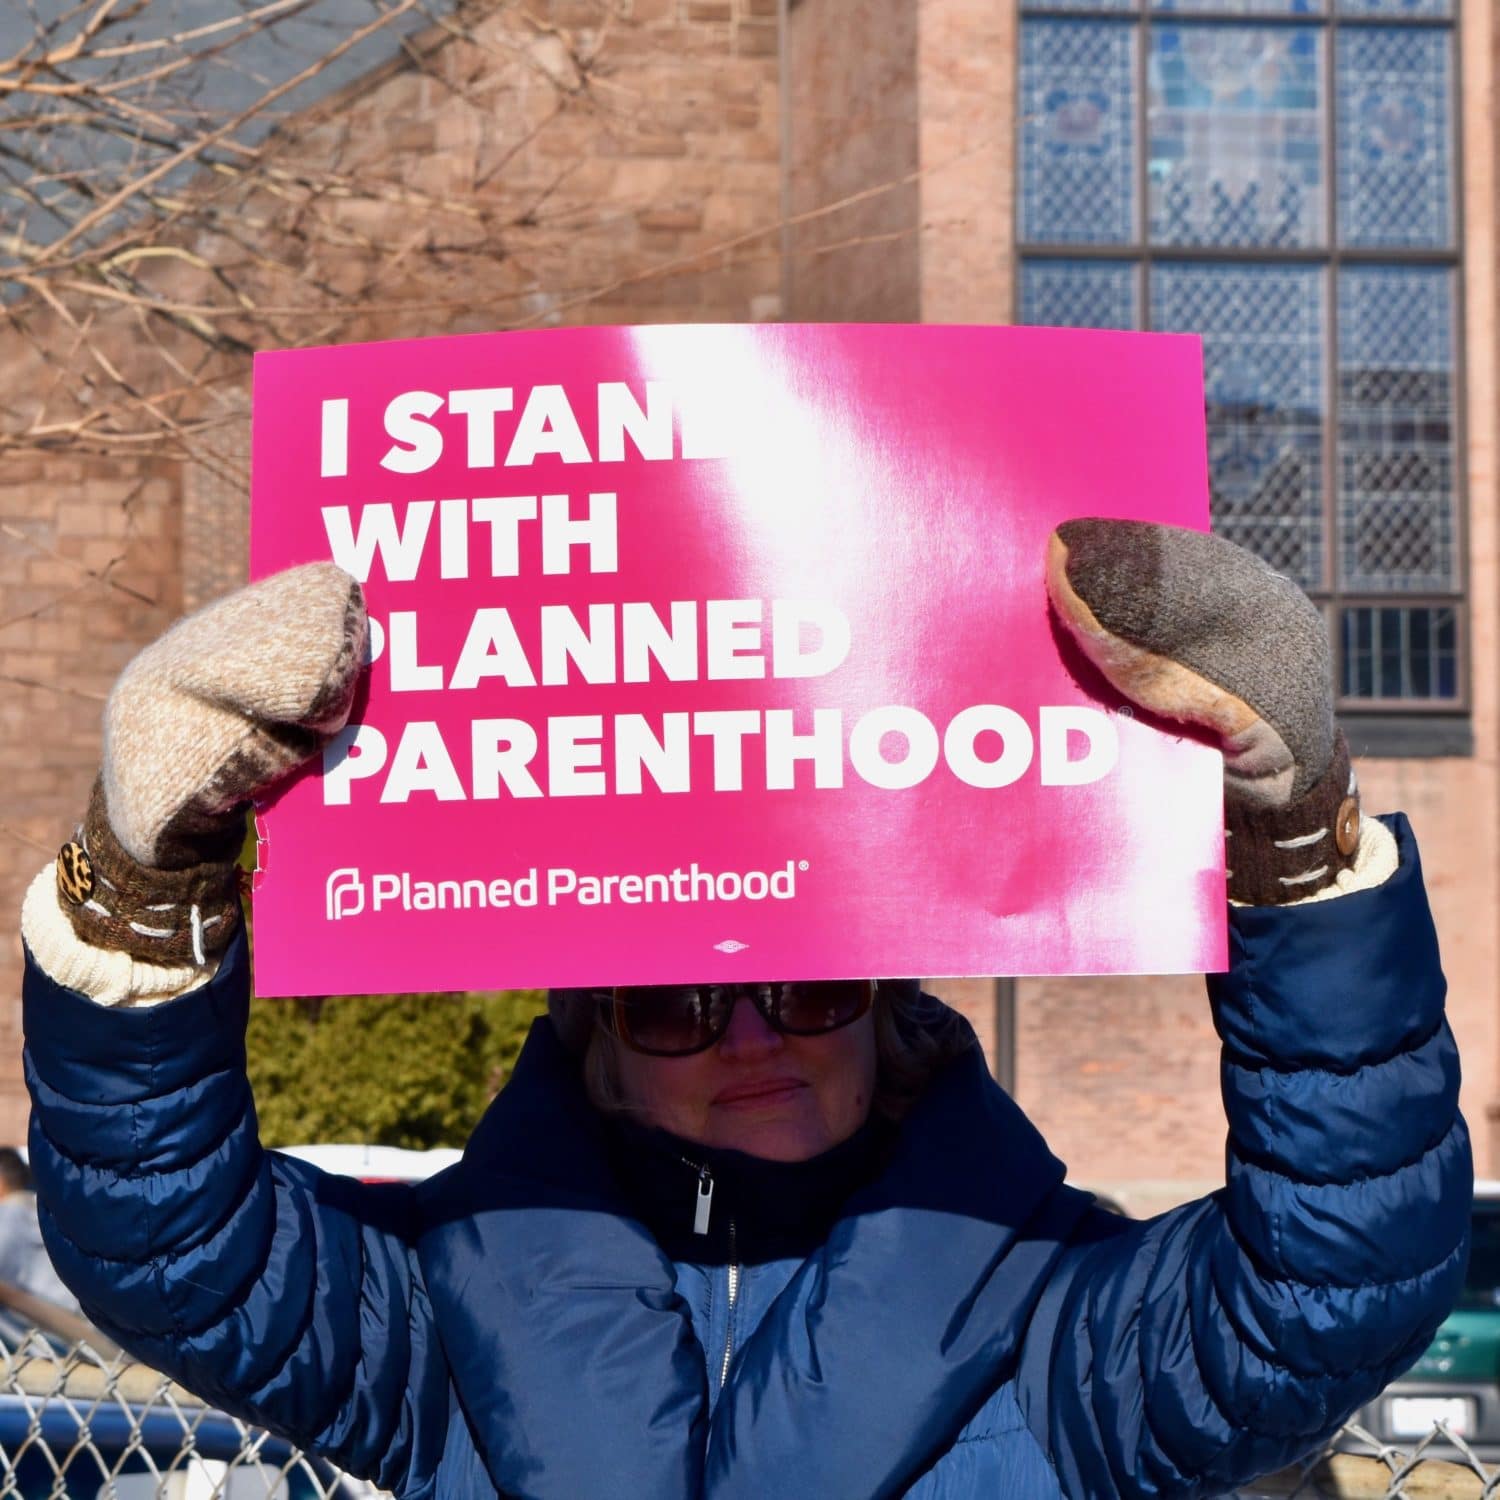 Rhode Island News: Unless Ninth Circuit intervenes by August 19, Planned Parenthood of Southern New England will be forced out of the Title X program